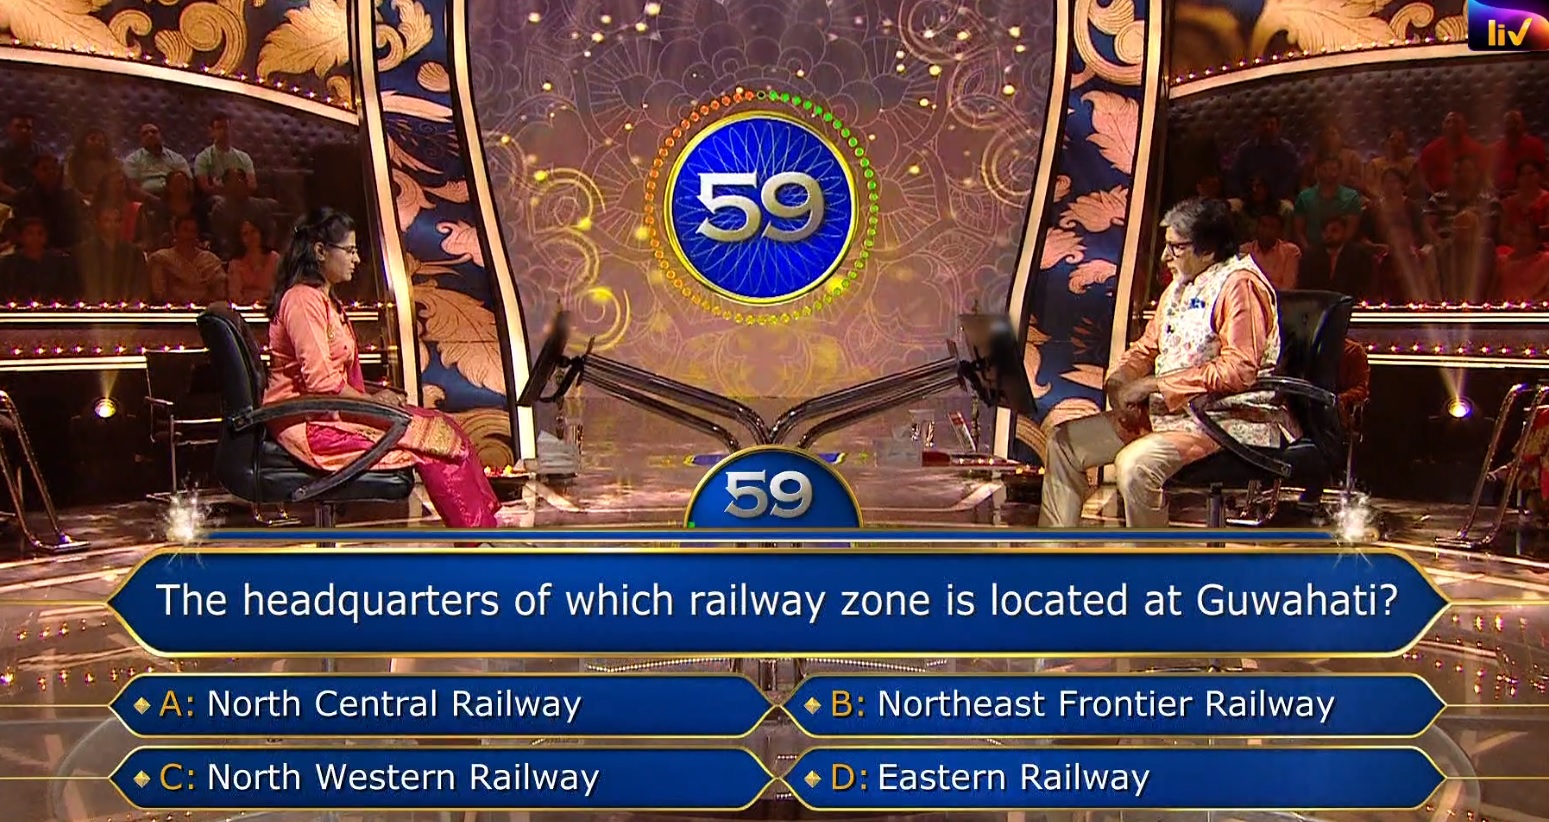 Ques : The headquarters of which railway zone is located at Guwahati?